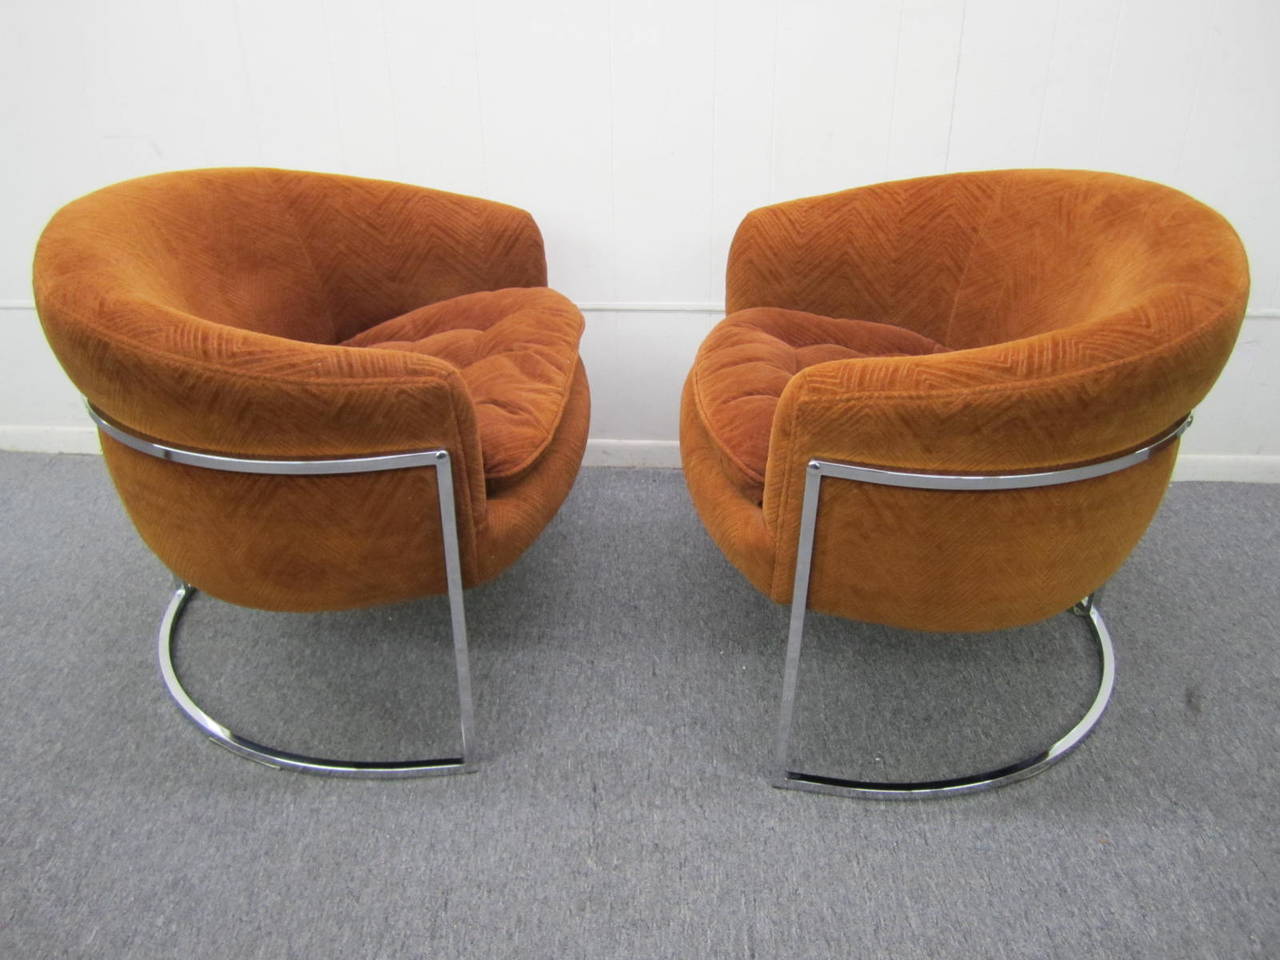 Excellent pair of Milo Baughman thin chrome frame barrel back lounge chairs. These retain their original orange cut velvet upholstery in nice condition. The chrome frames are also in nice vintage condition and are bright and shiny. Really nice as is